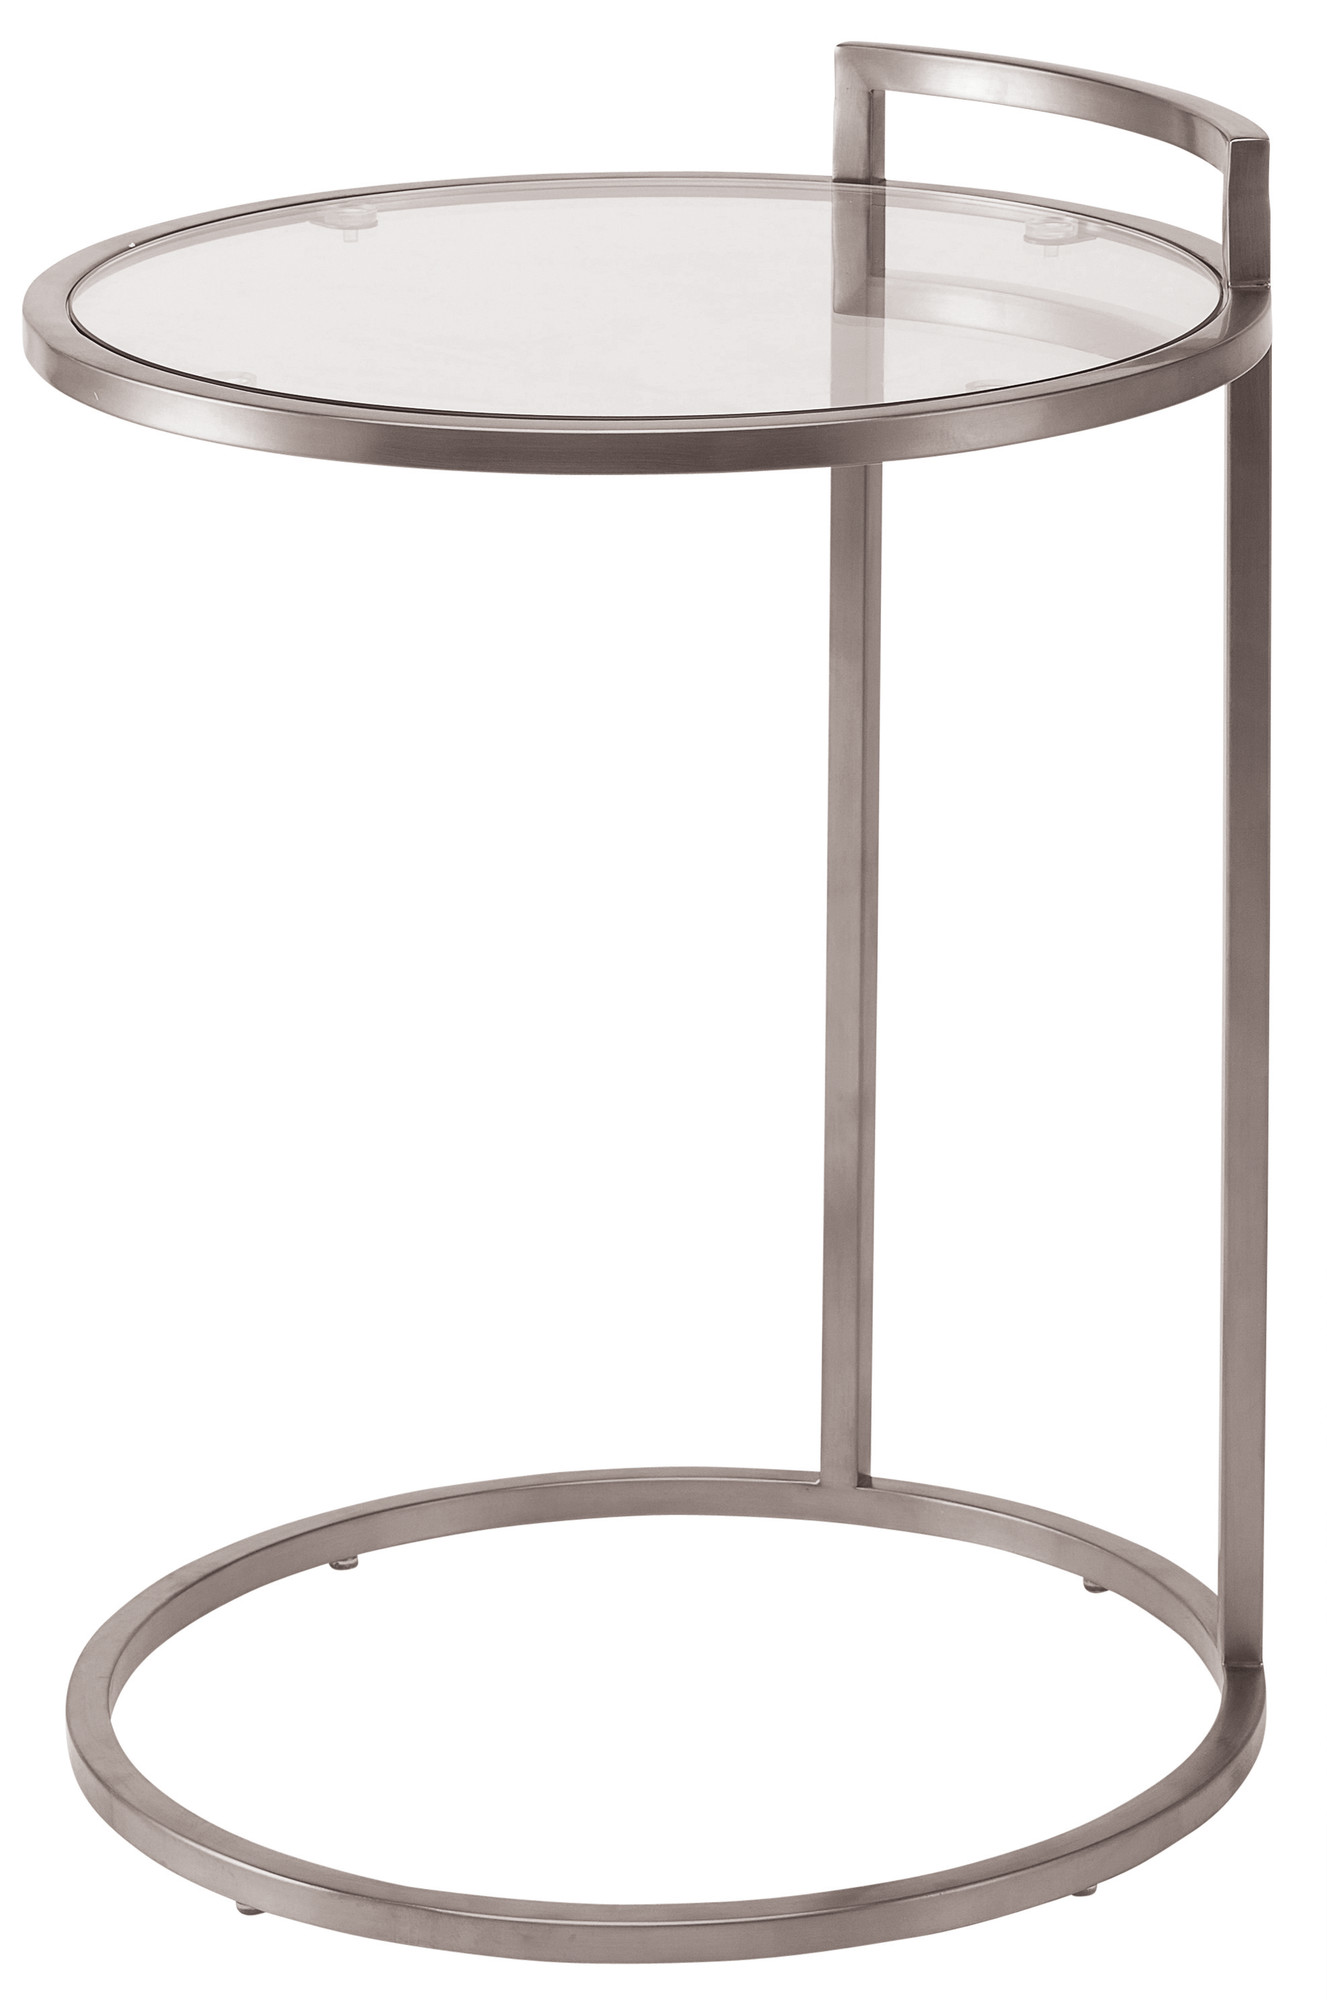 lily-side-table-stainless-steel.jpg